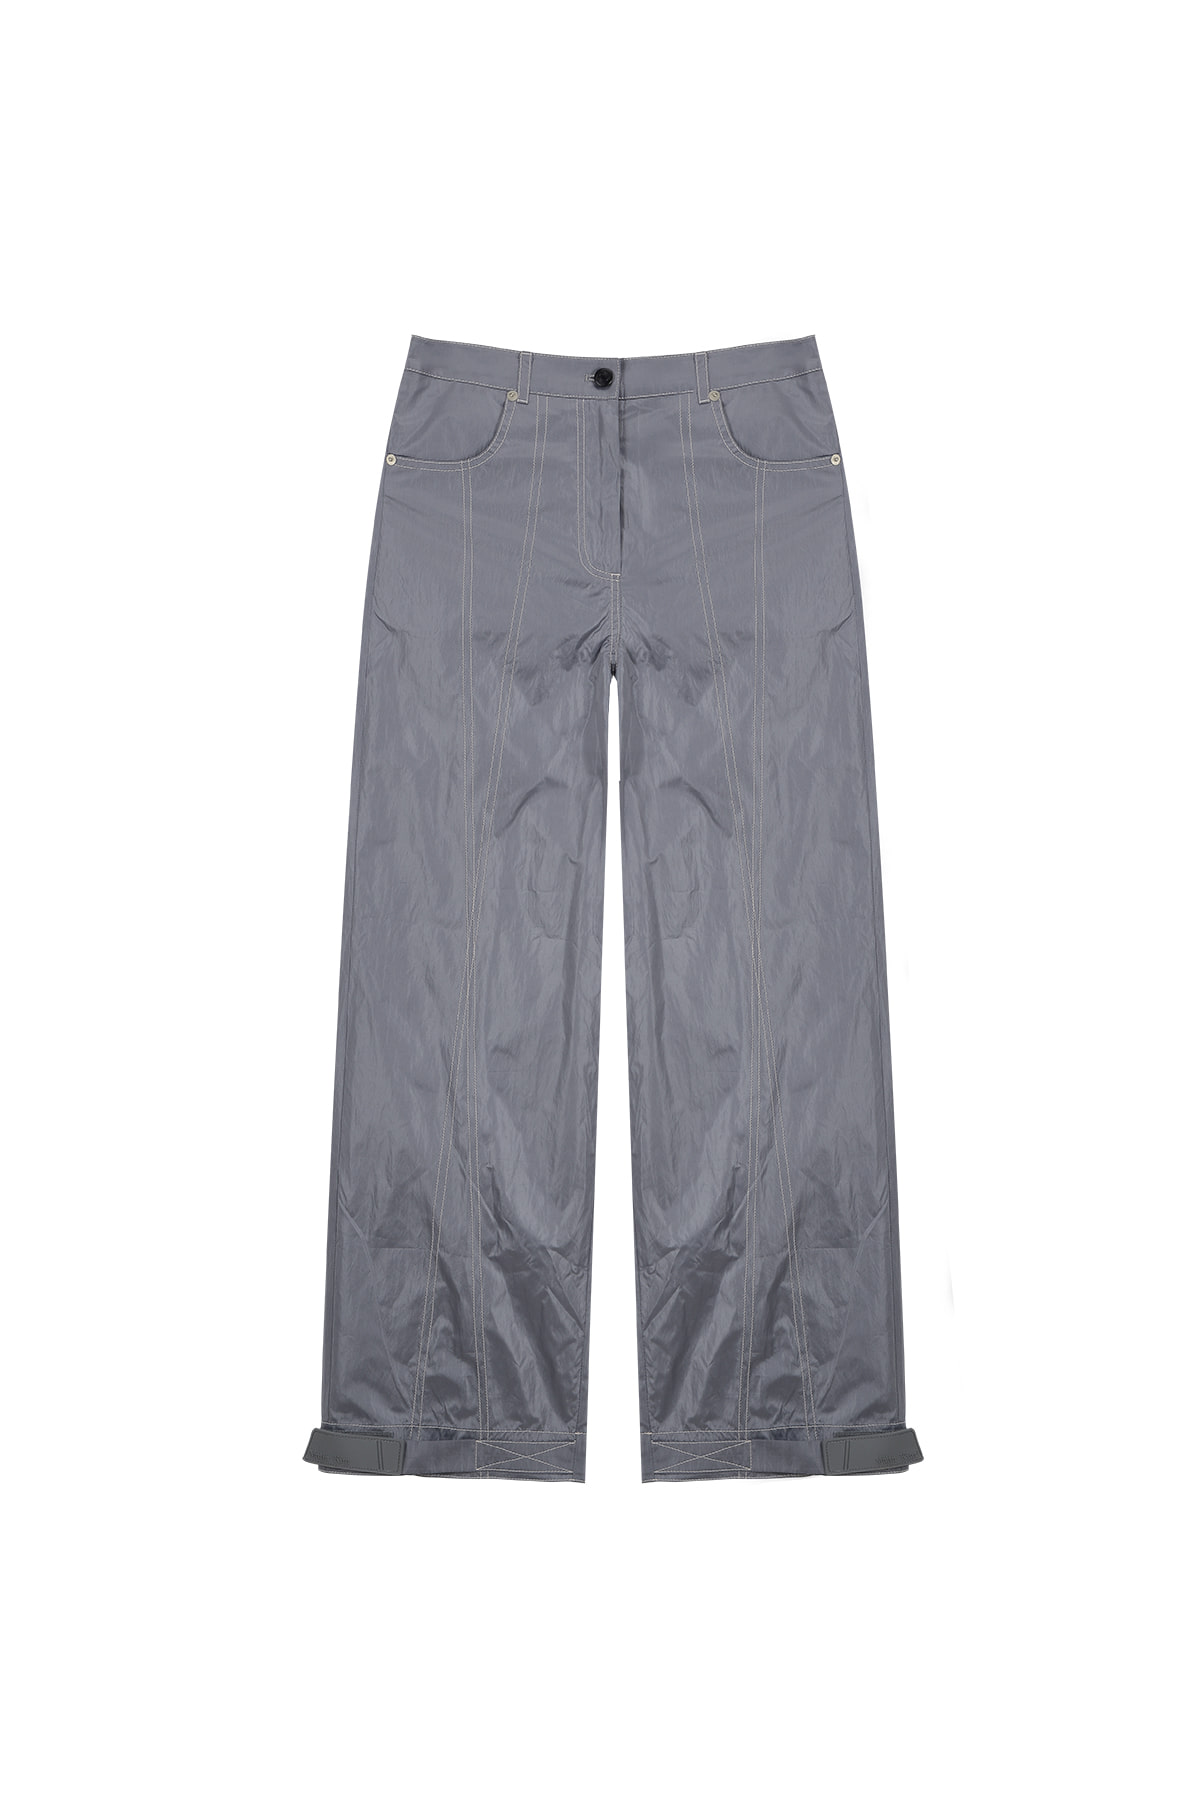 STITCH DETAILED TRUCKER PANTS IN GREY